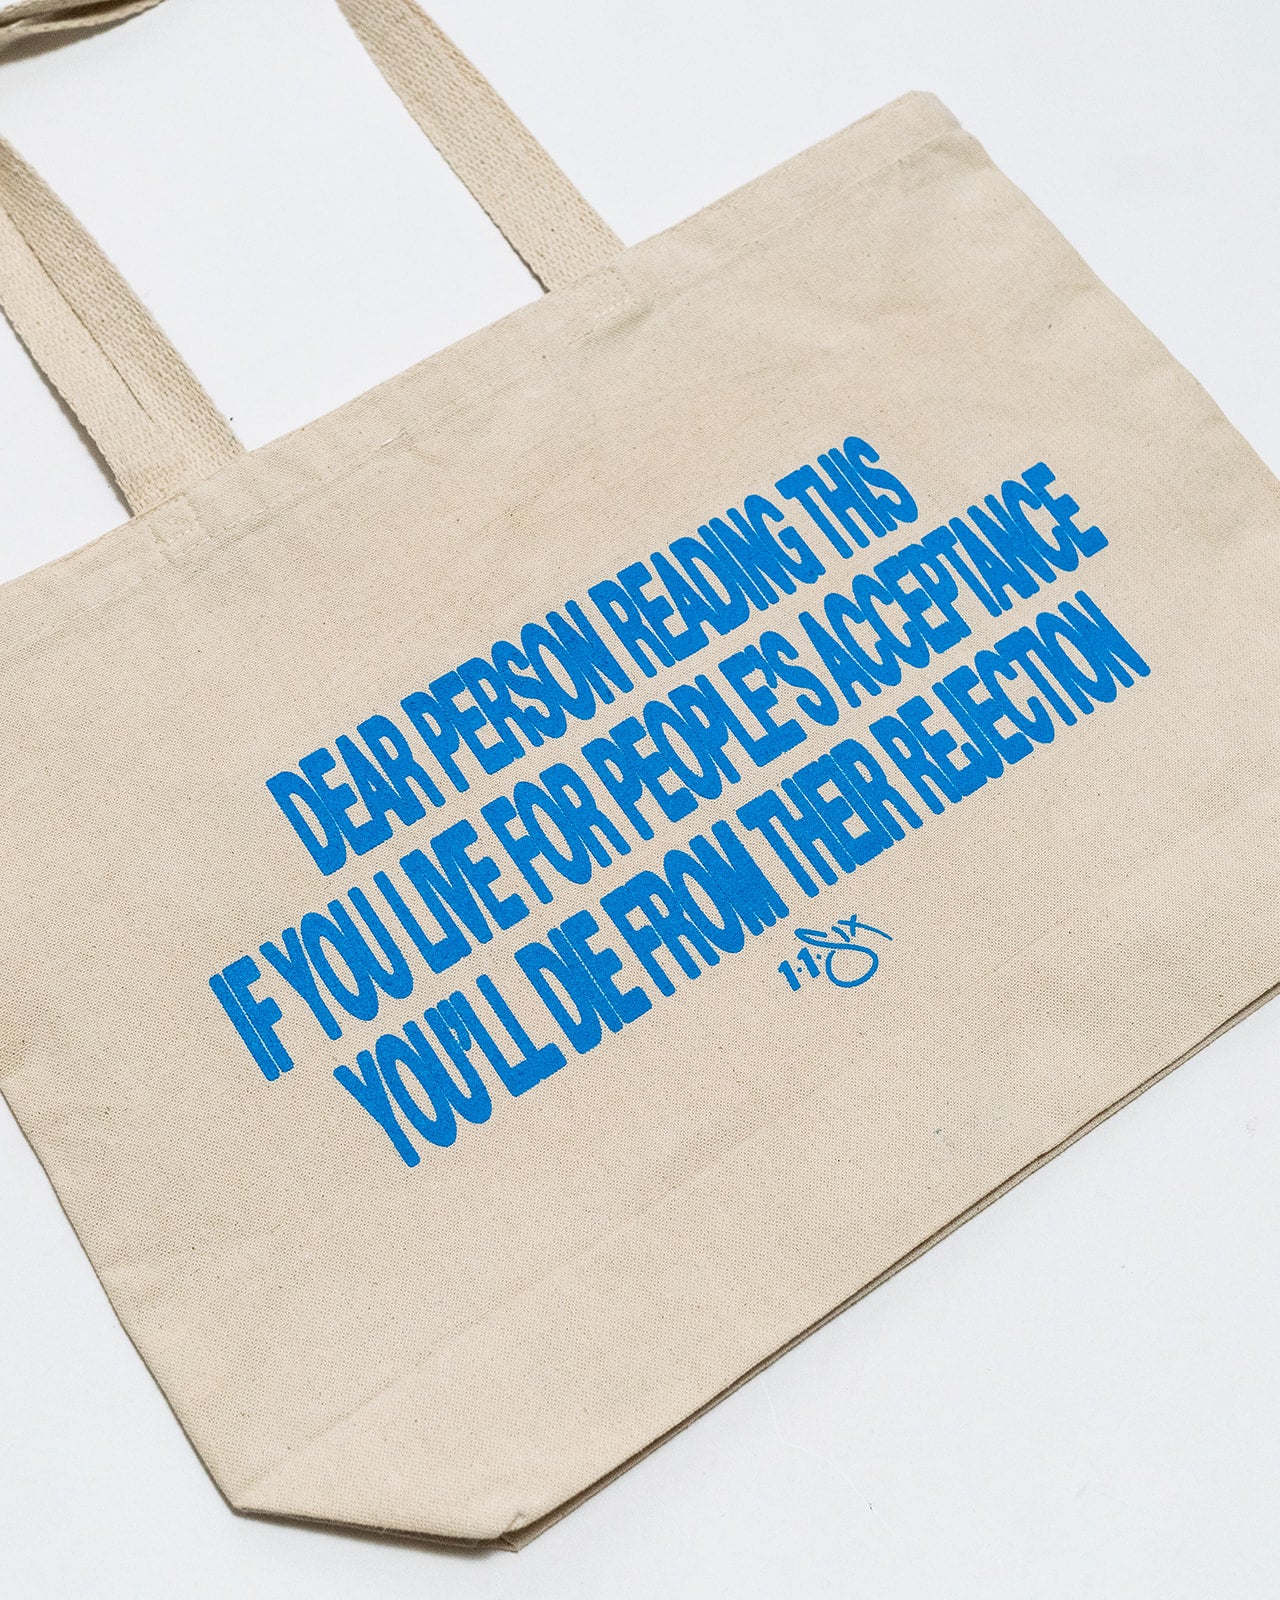 Accepted Tote Bag